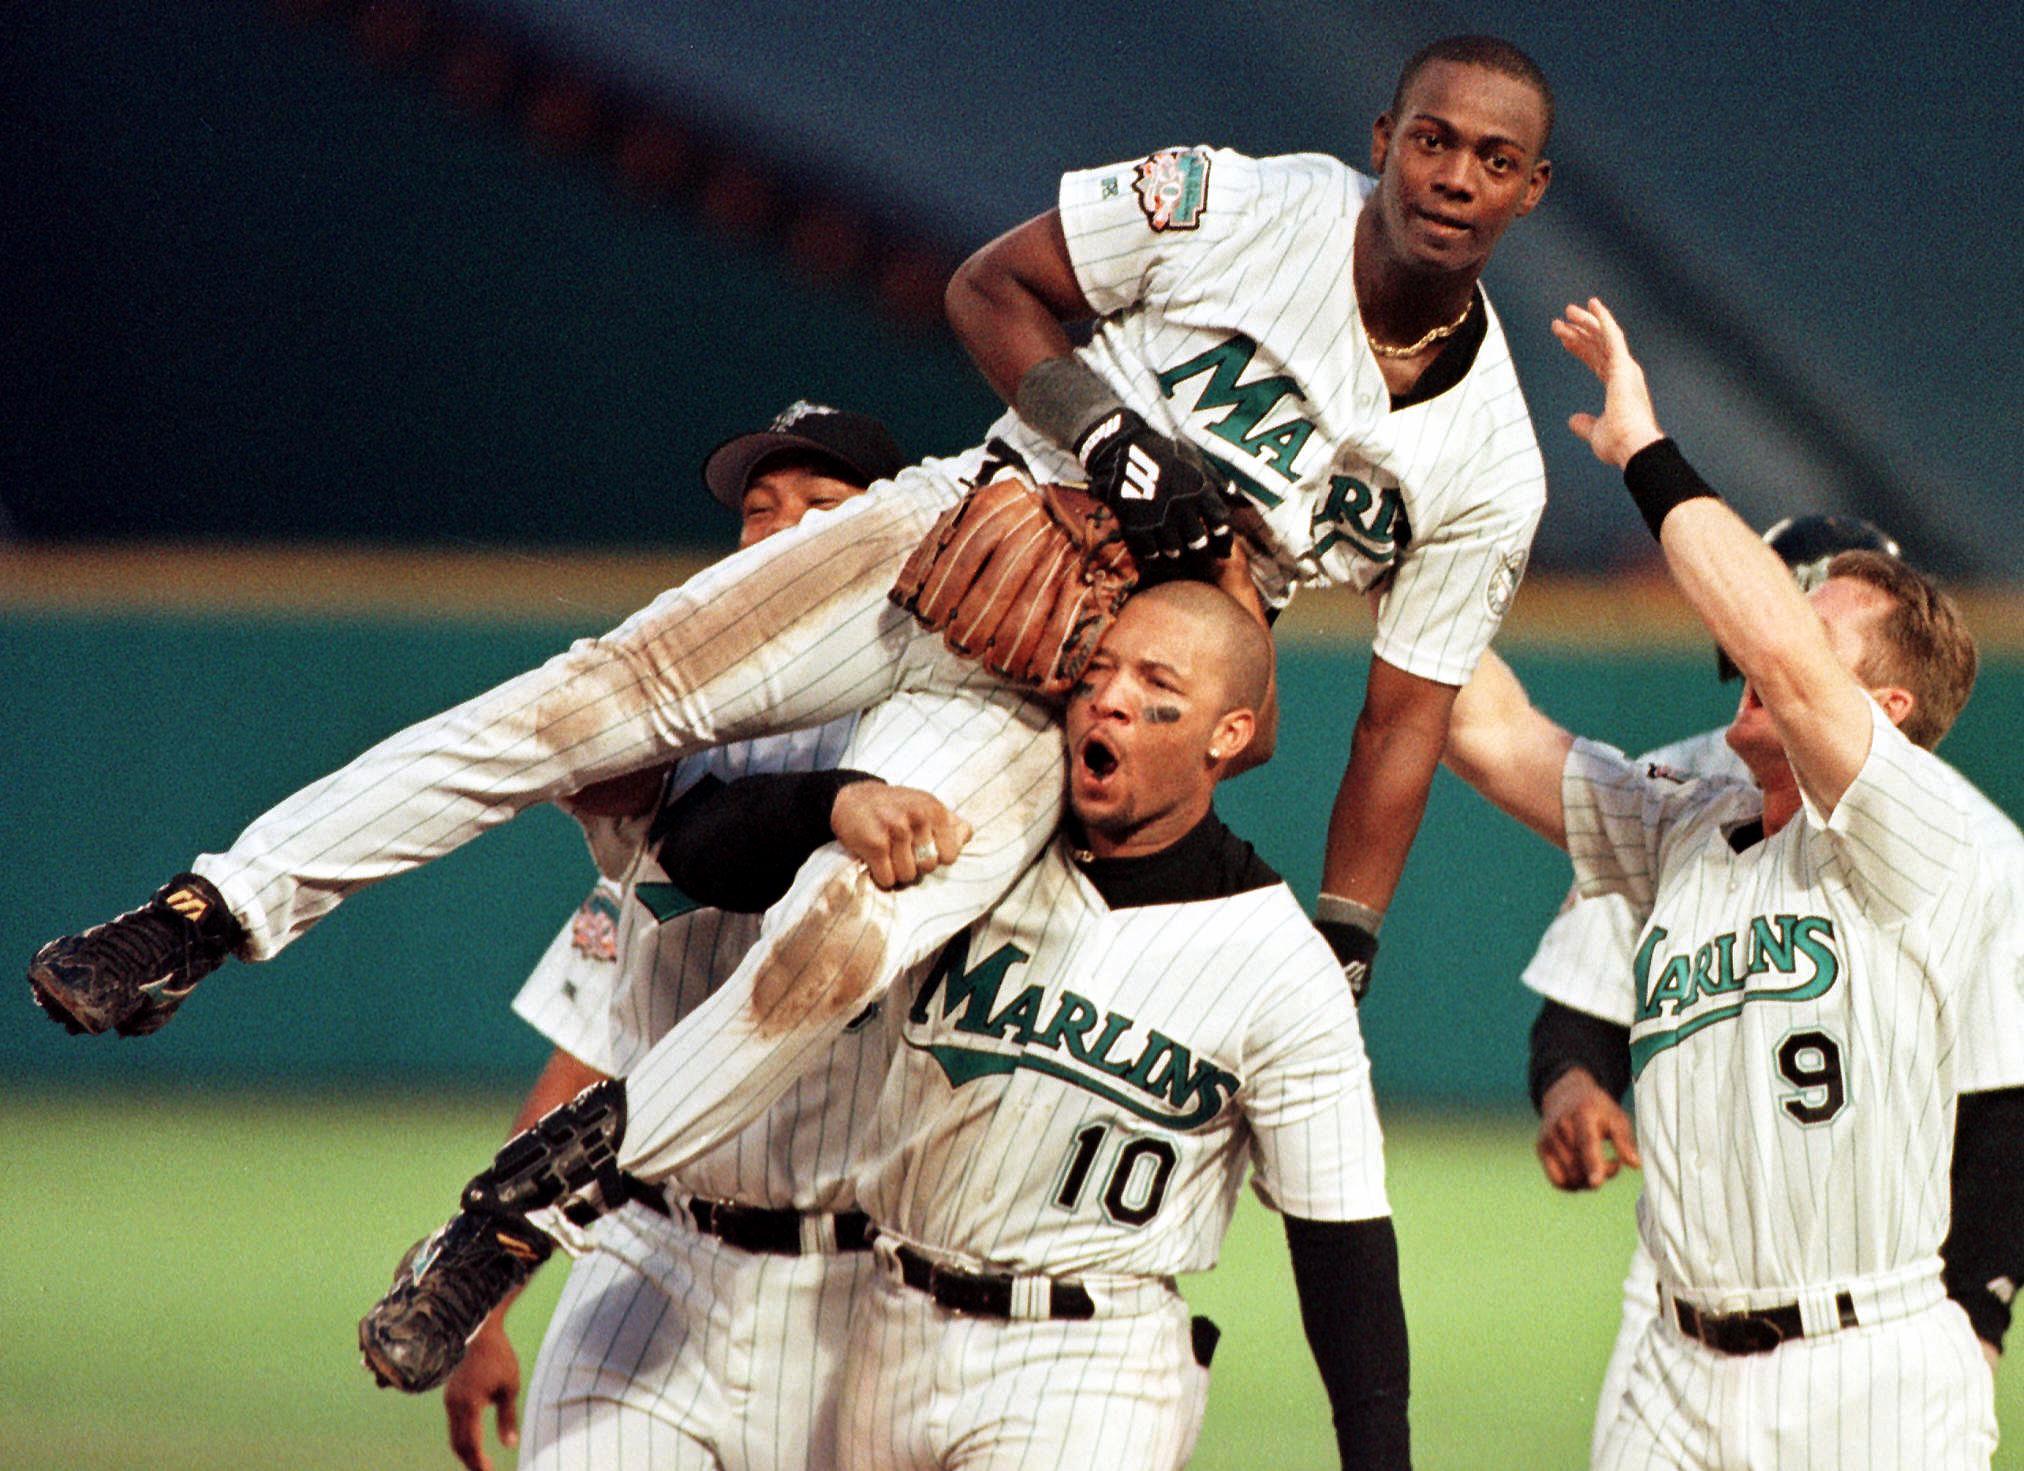 Florida Marlins player Edgar Renteria (TOP) is carried off the field by Gary Sheffield after delivering the game-winning hit 30 September against the San Francisco Giants during their National League Division Series game at Pro Player Stadium in Miami, FL. The Marlins won the game 2-1.